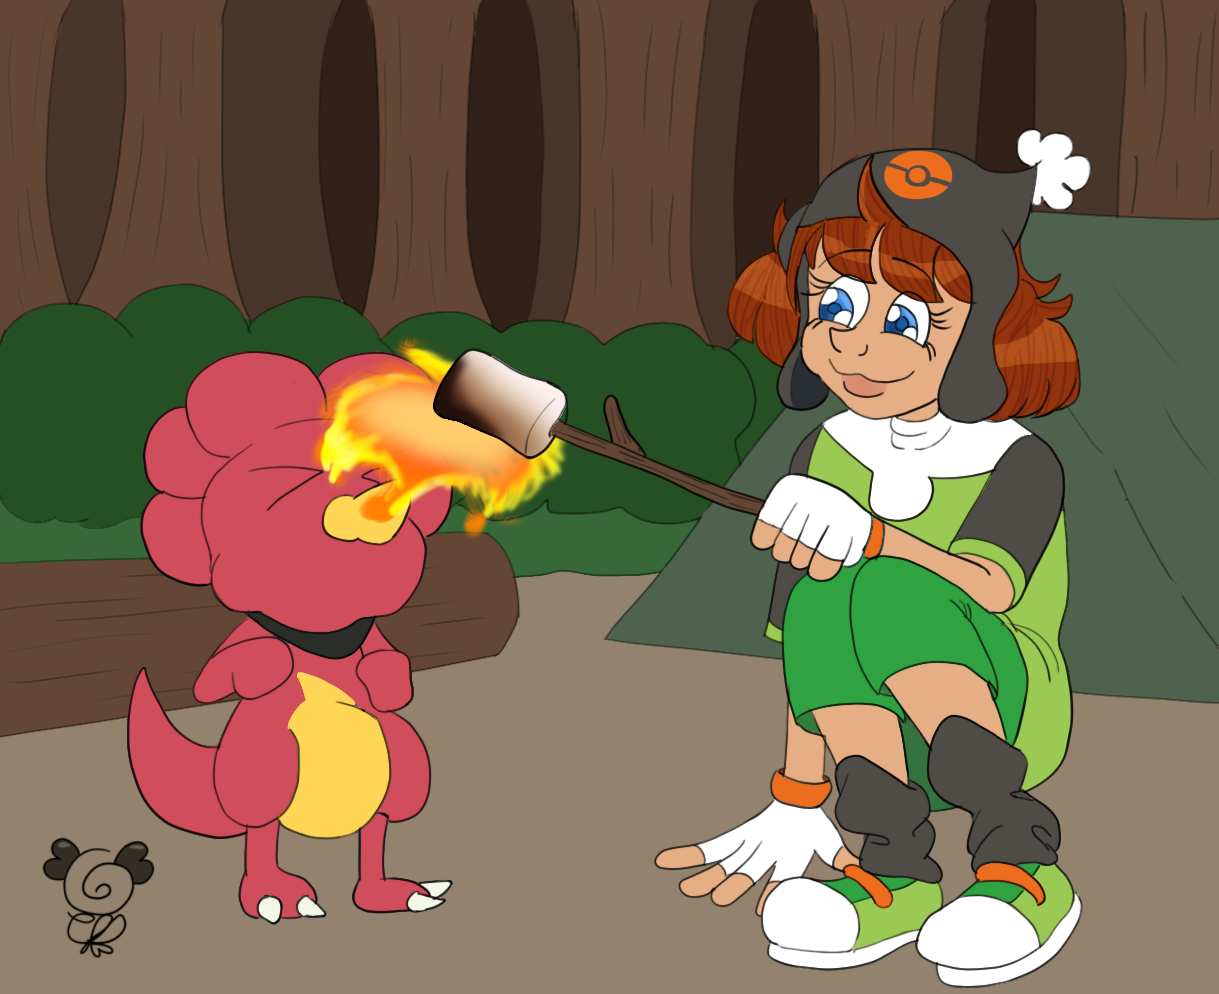 EchoTULF's OC, Zeth training her Magby on how to hone their fire powers!